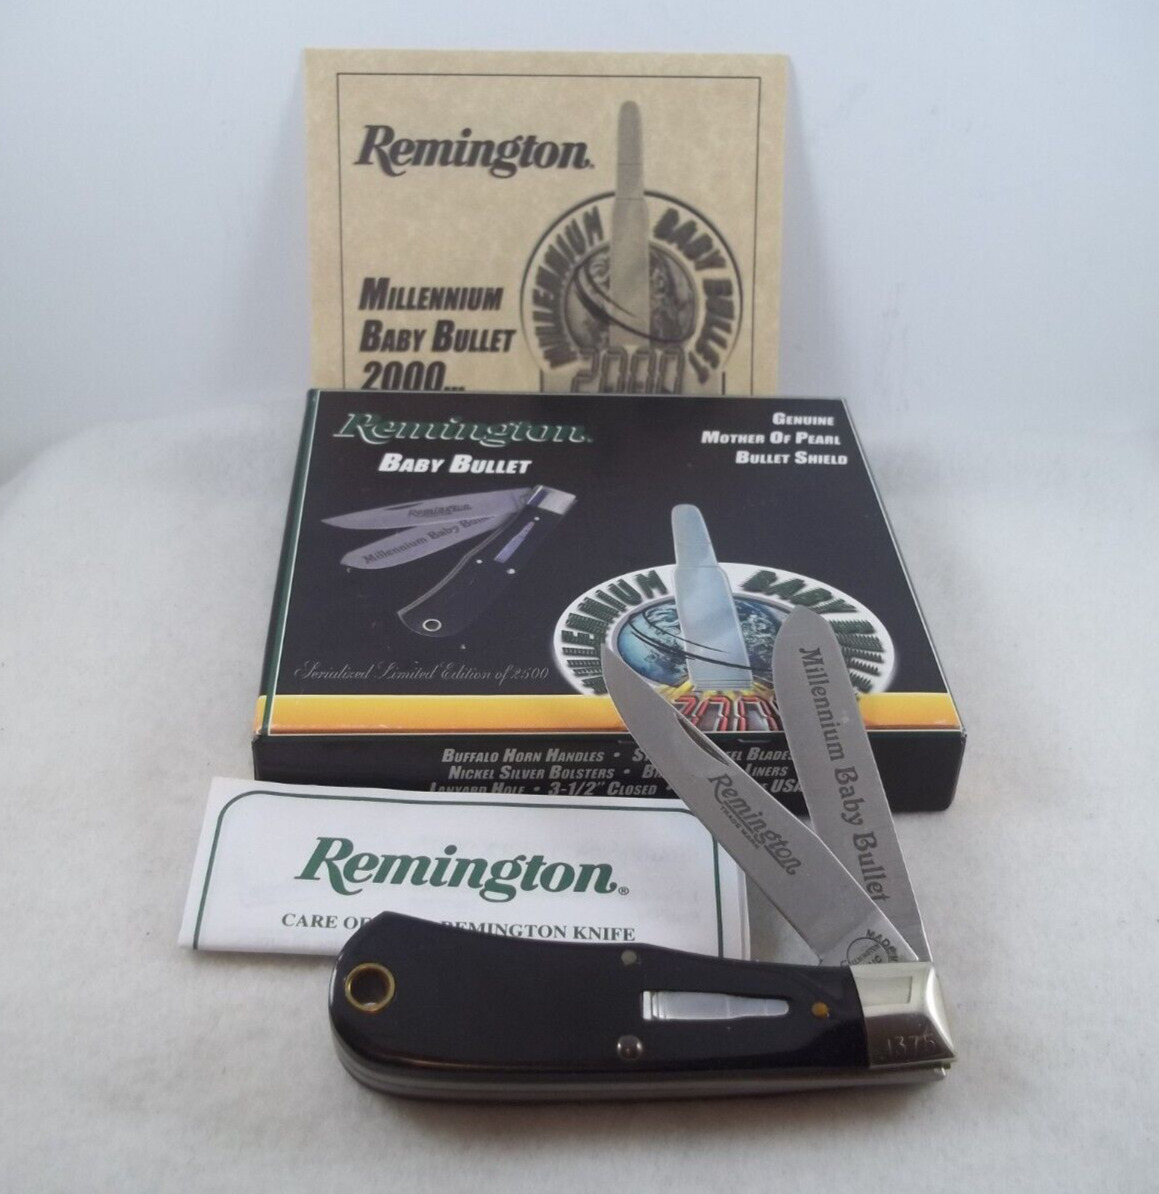 Remington Millennium Baby Bullet 2000 RE18887 Knife -Mother of Pearl